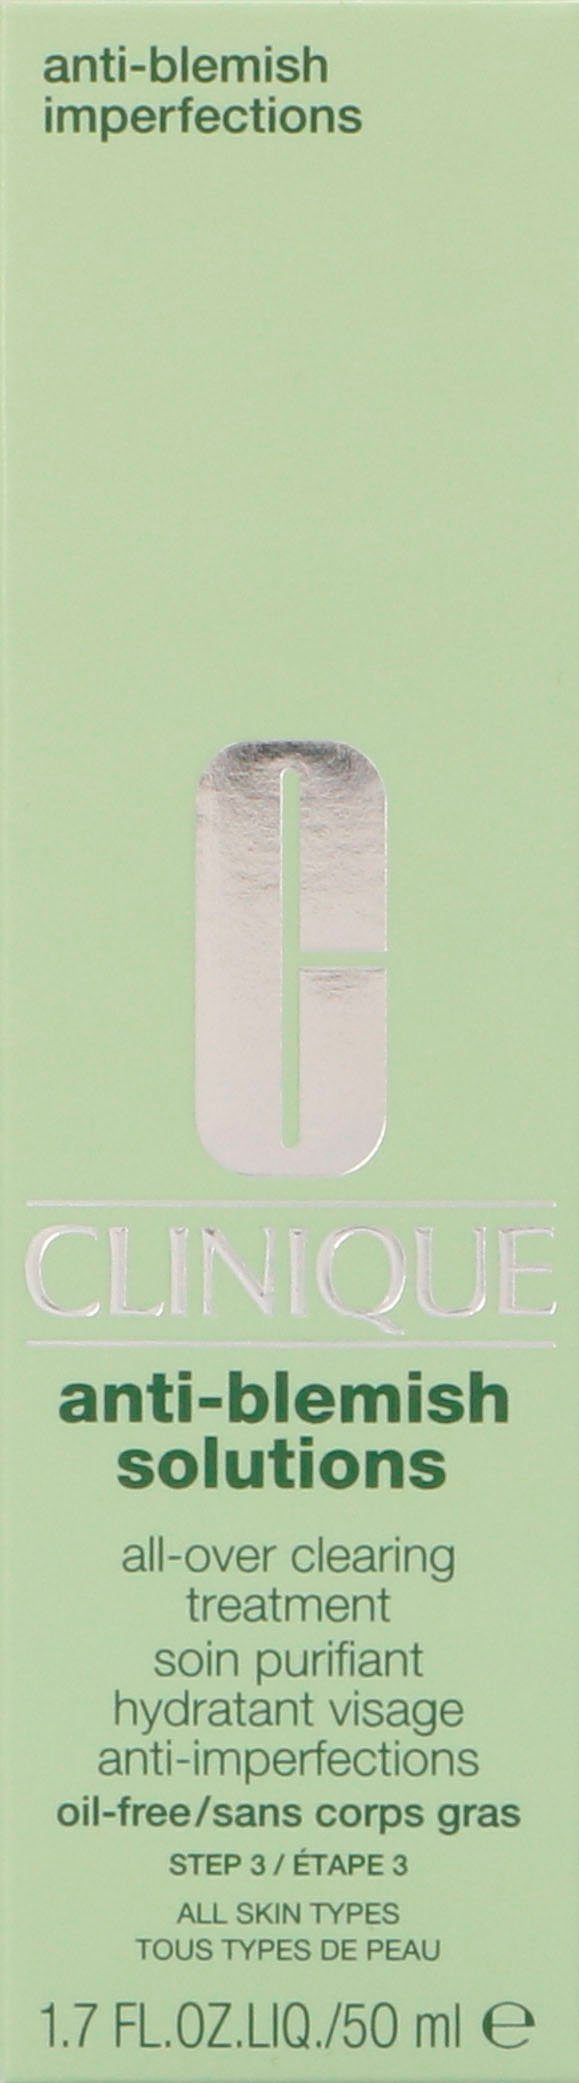 All-Over Clearing Anti-Blemish Solutions Gesichts-Reinigungscreme CLINIQUE Treatment